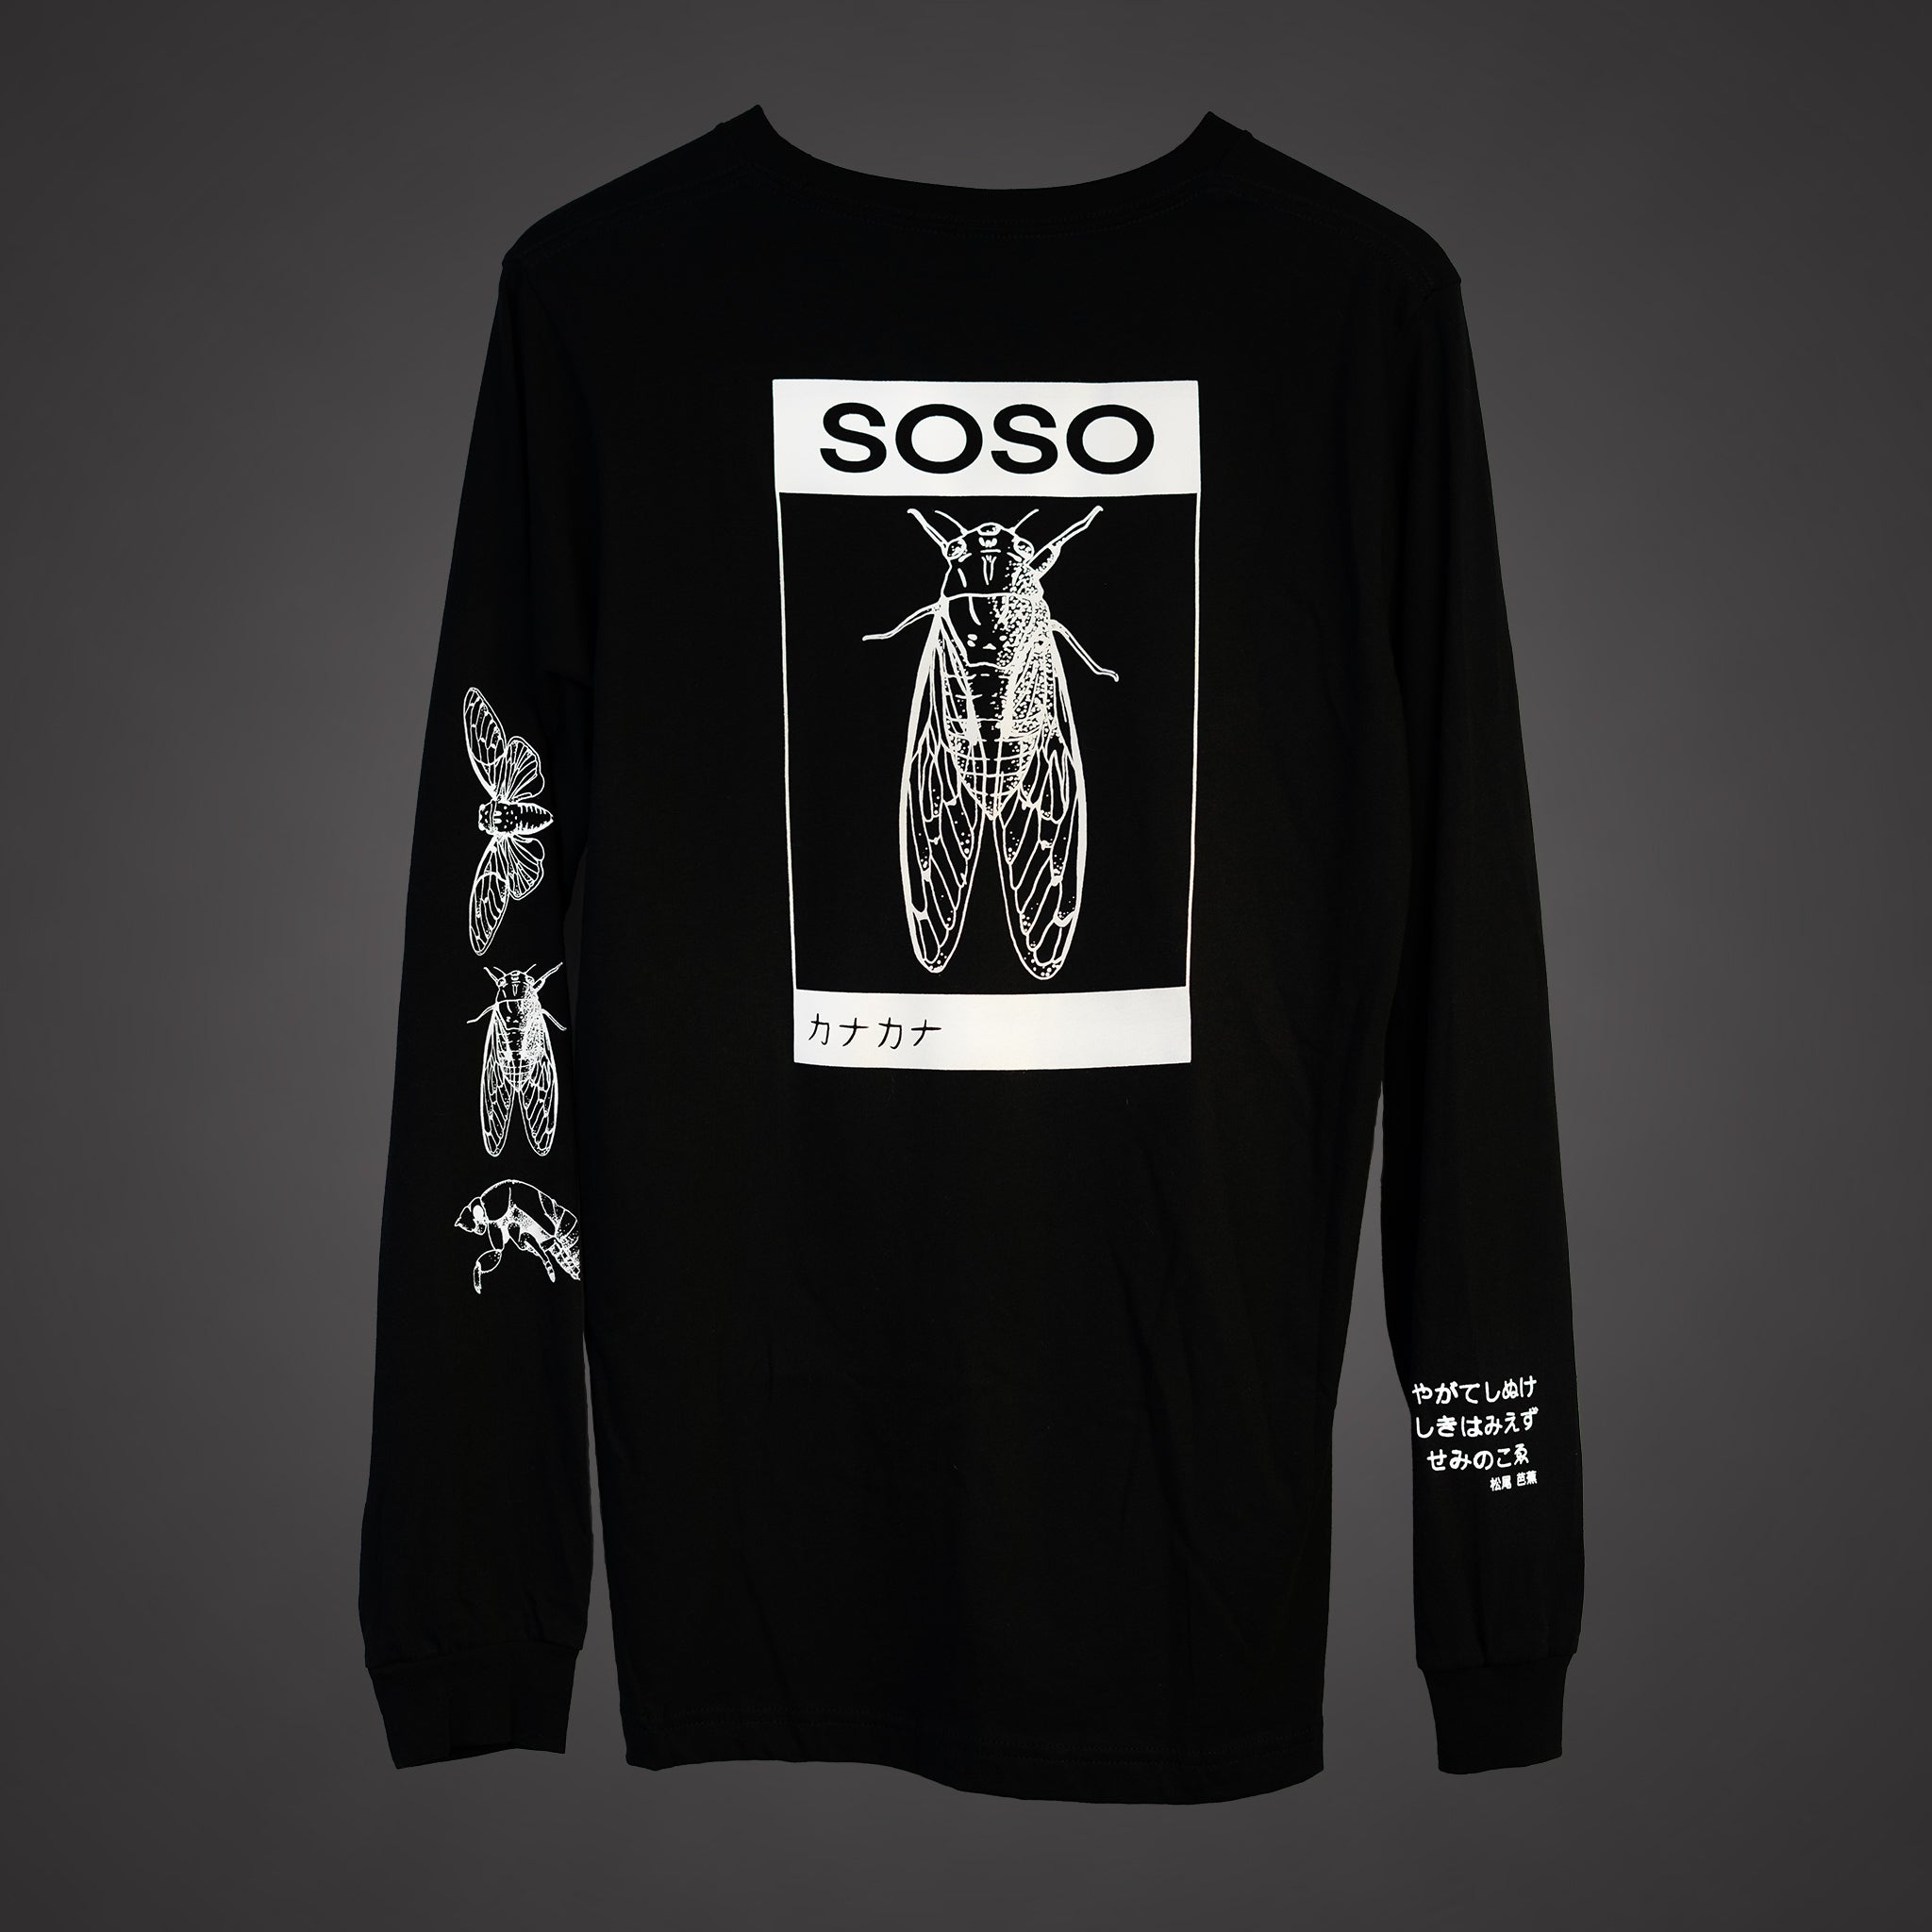 Long sleeve black shirt with cicada graphic design in white, Japanese Streetwear